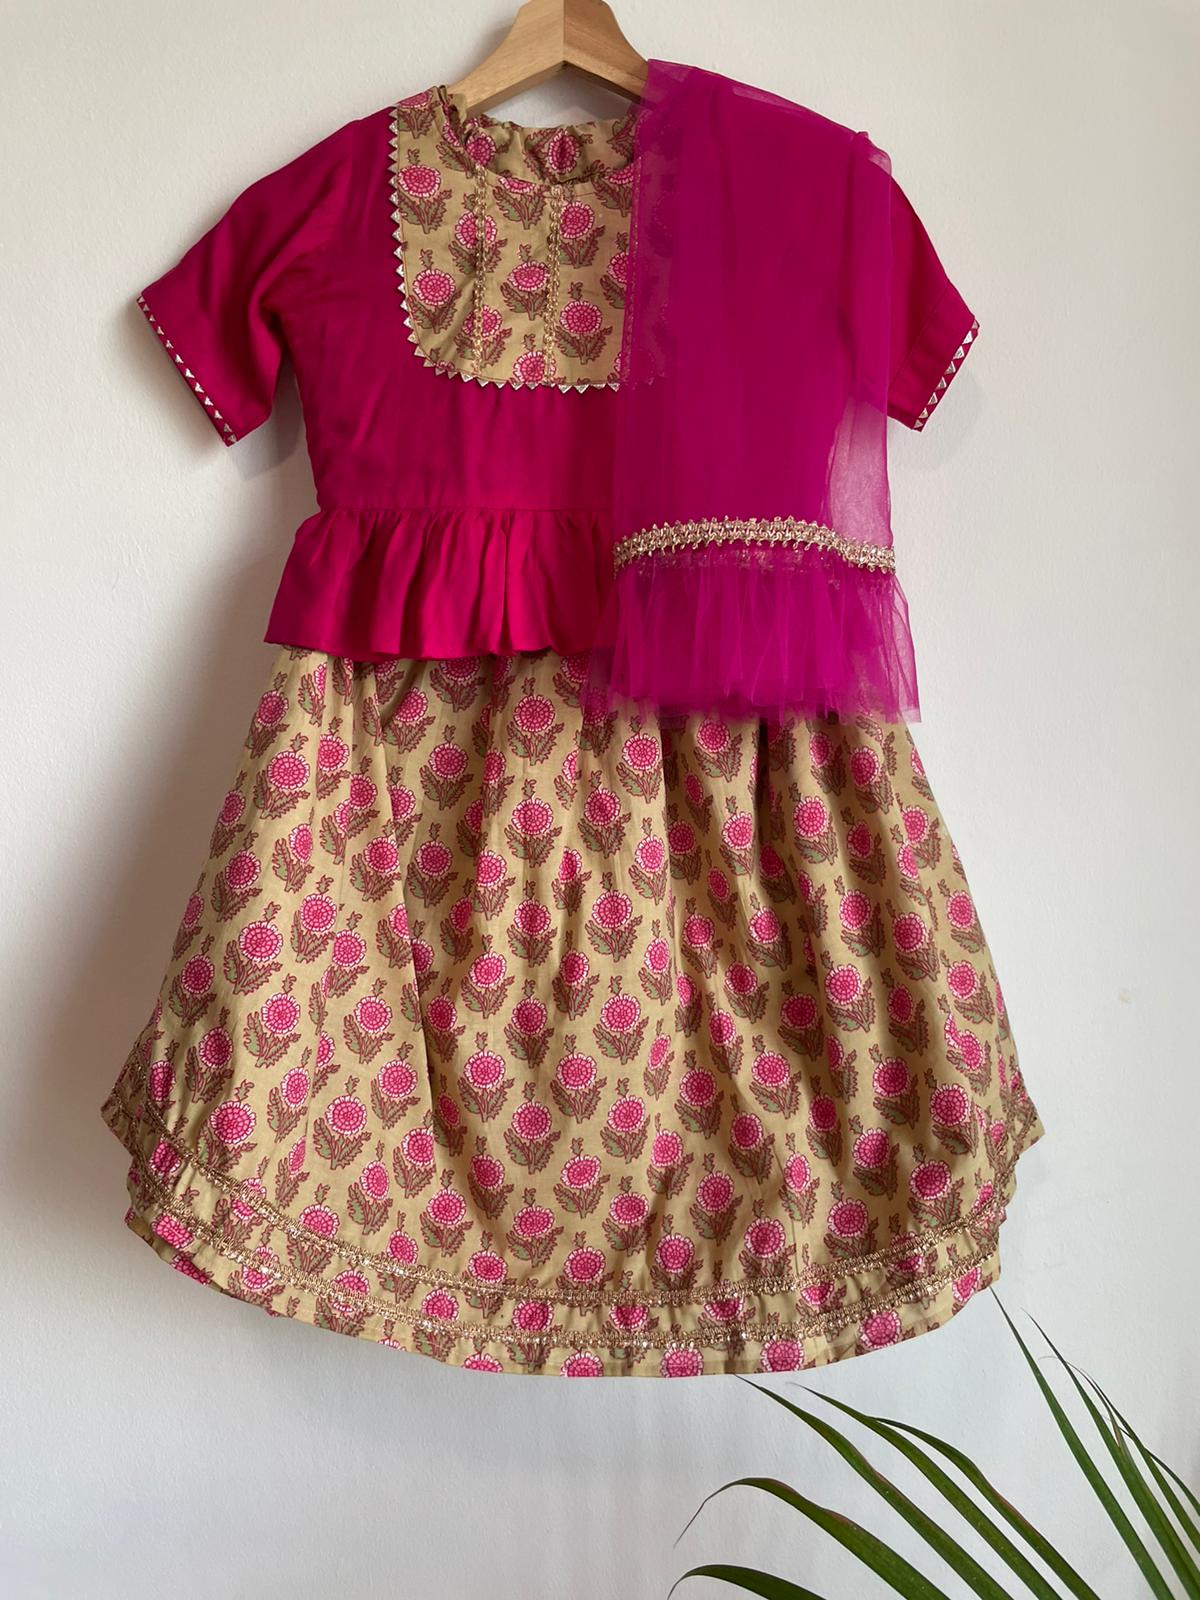 cute lehnga choli dress for girls in pink and brown